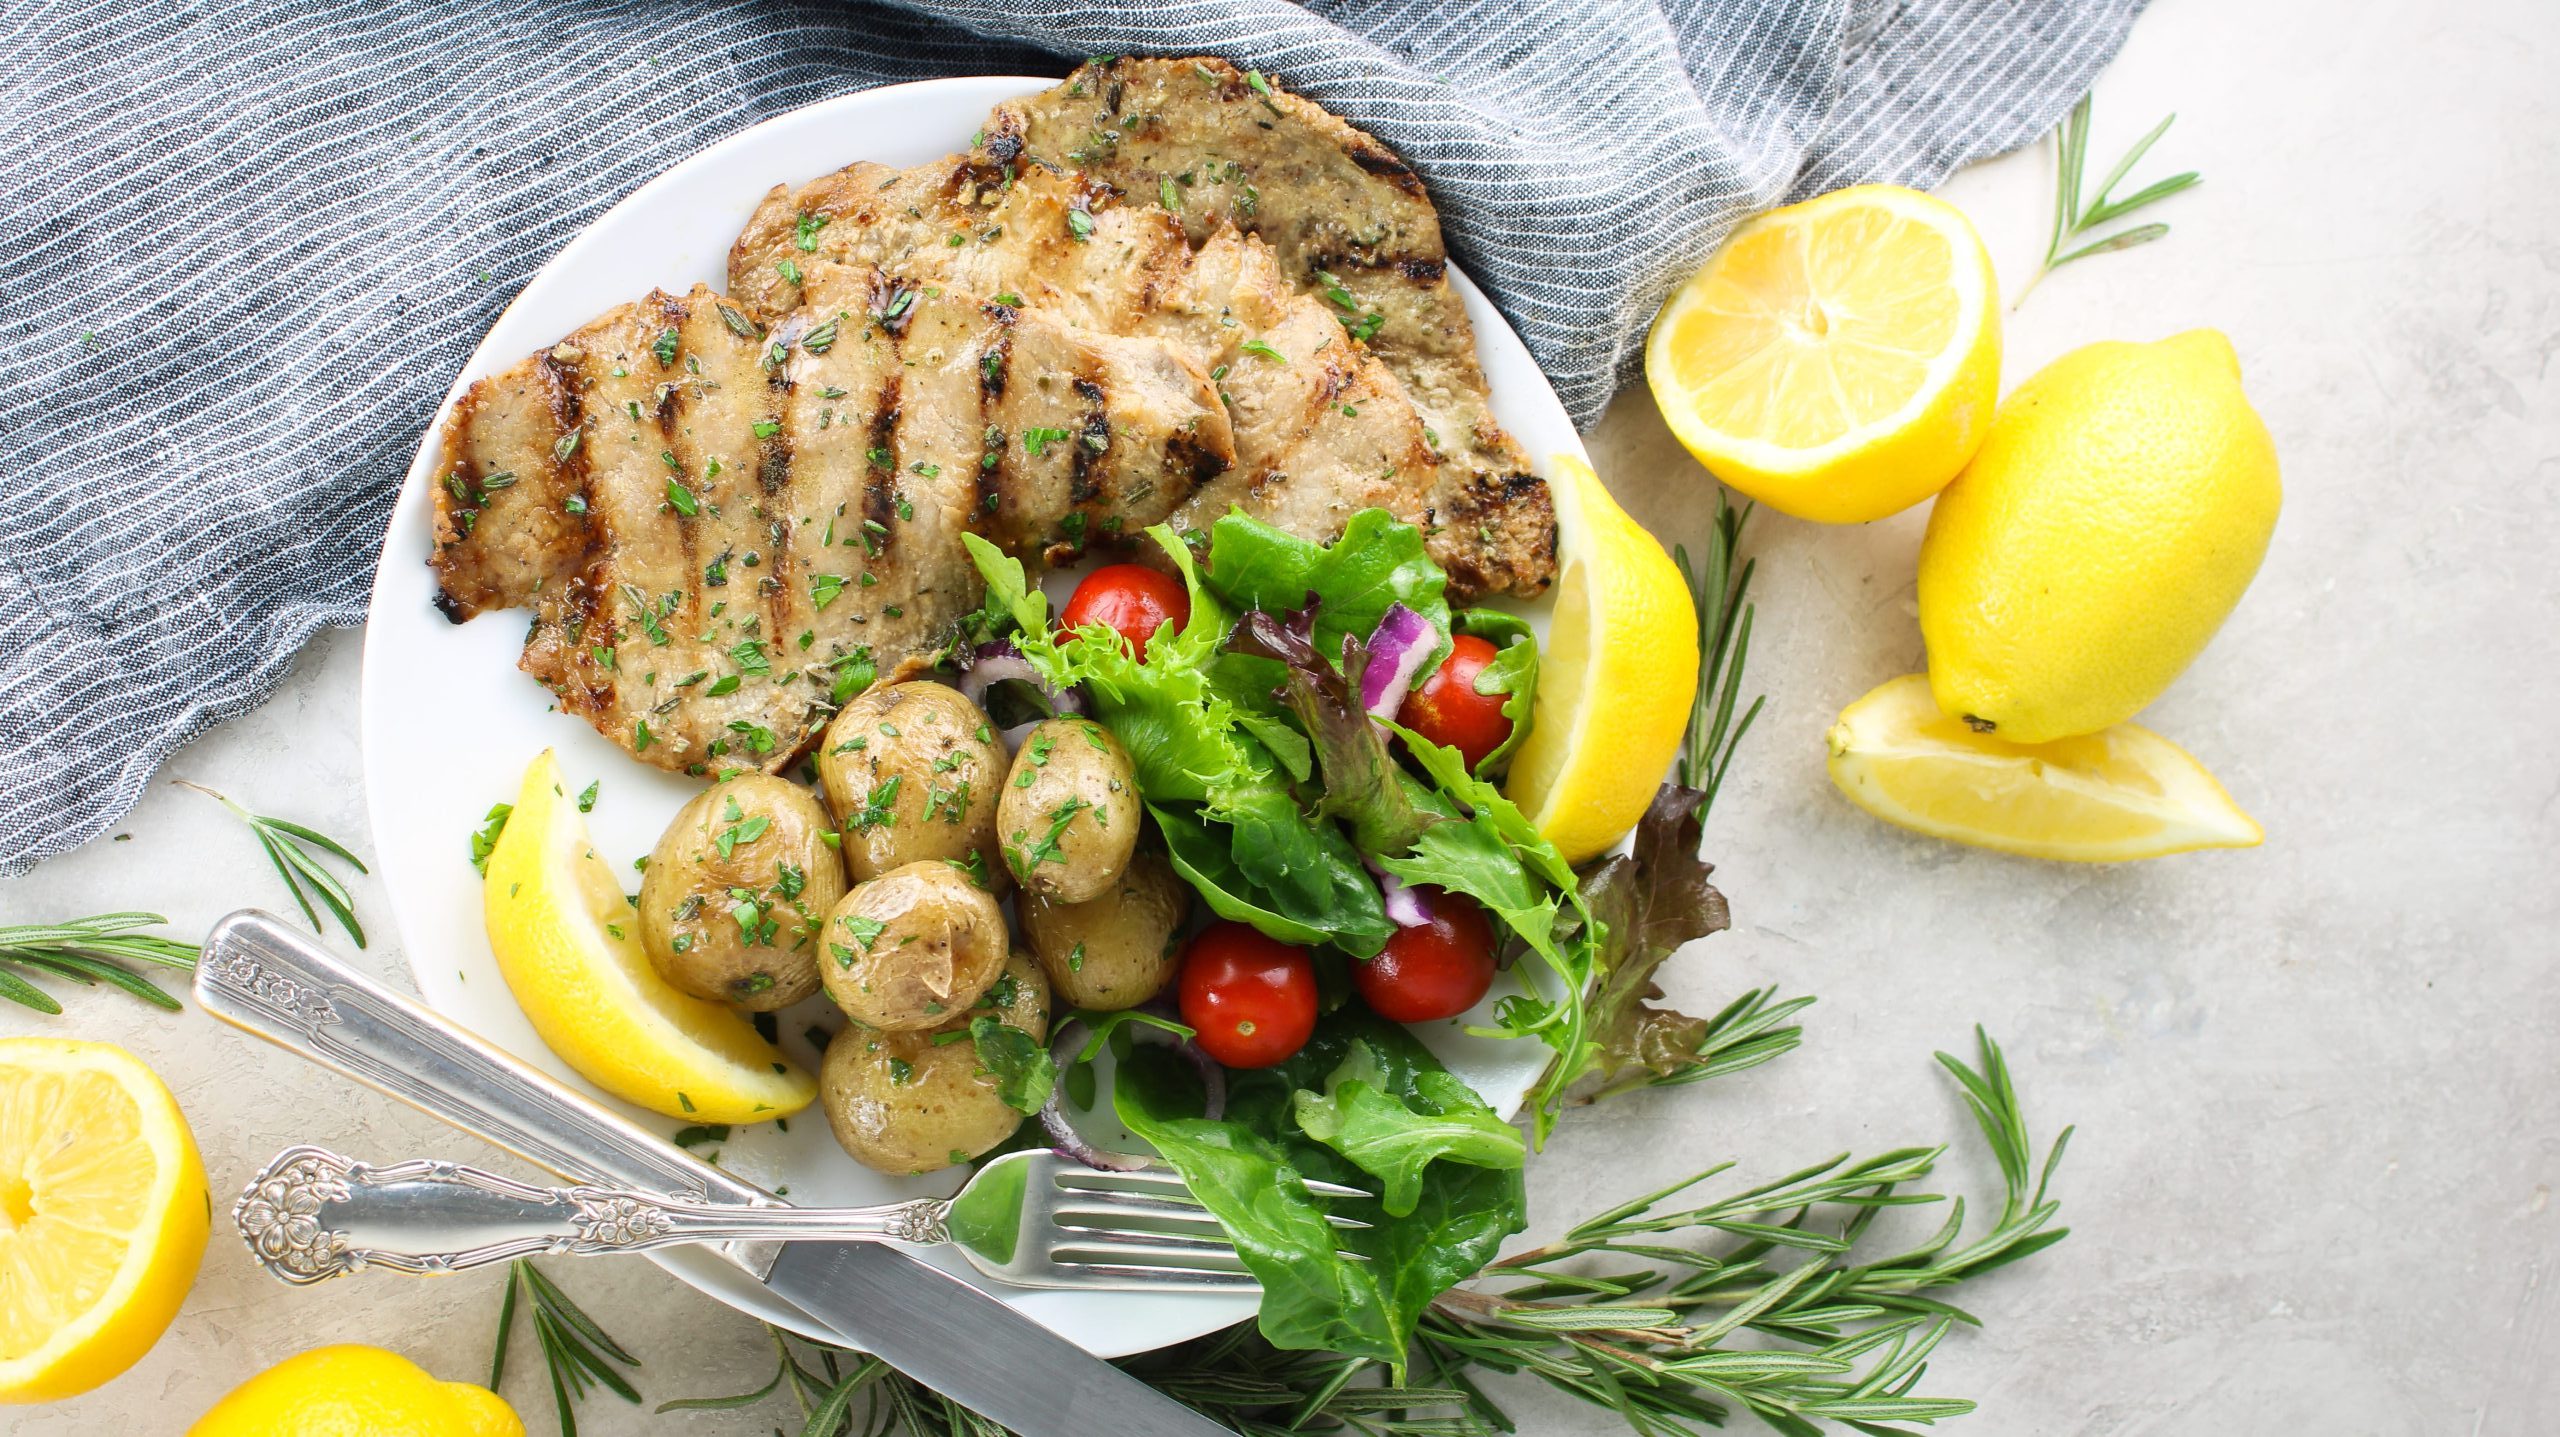 These Rosemary Grilled veal cutlets are season to perfection and served with grill marks over roasted potatoes, and with a side salad and lemon wedges.